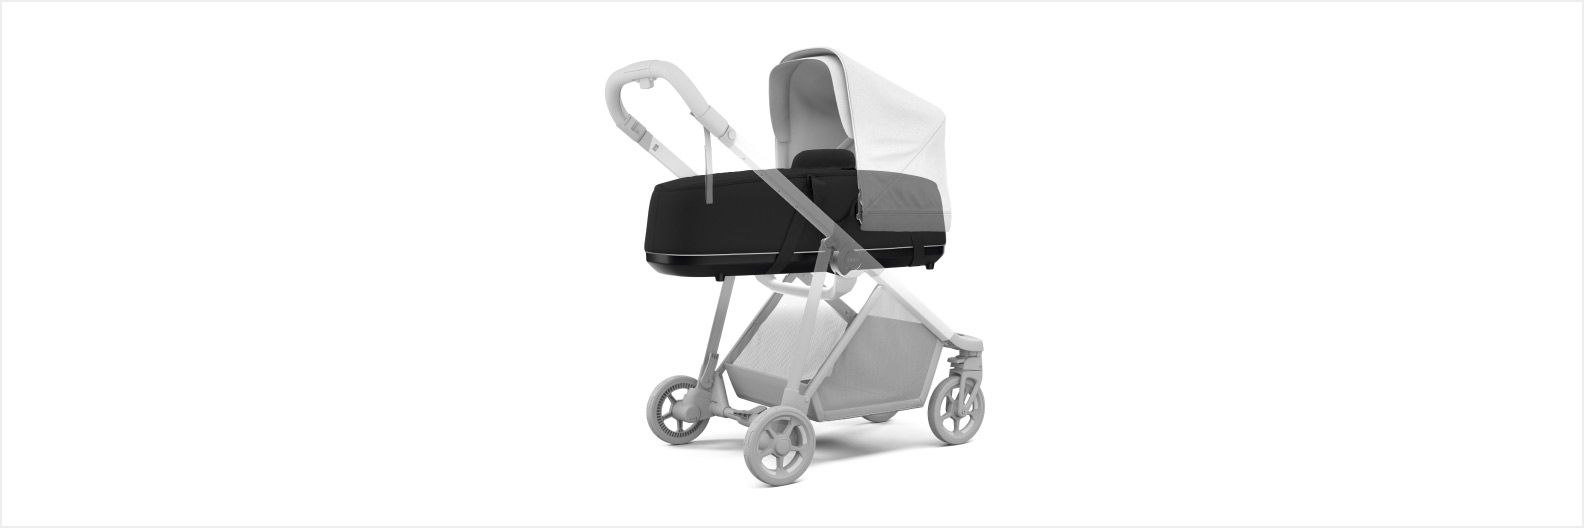 A 3D image of the Thule Shine bassinet stroller with a white background.